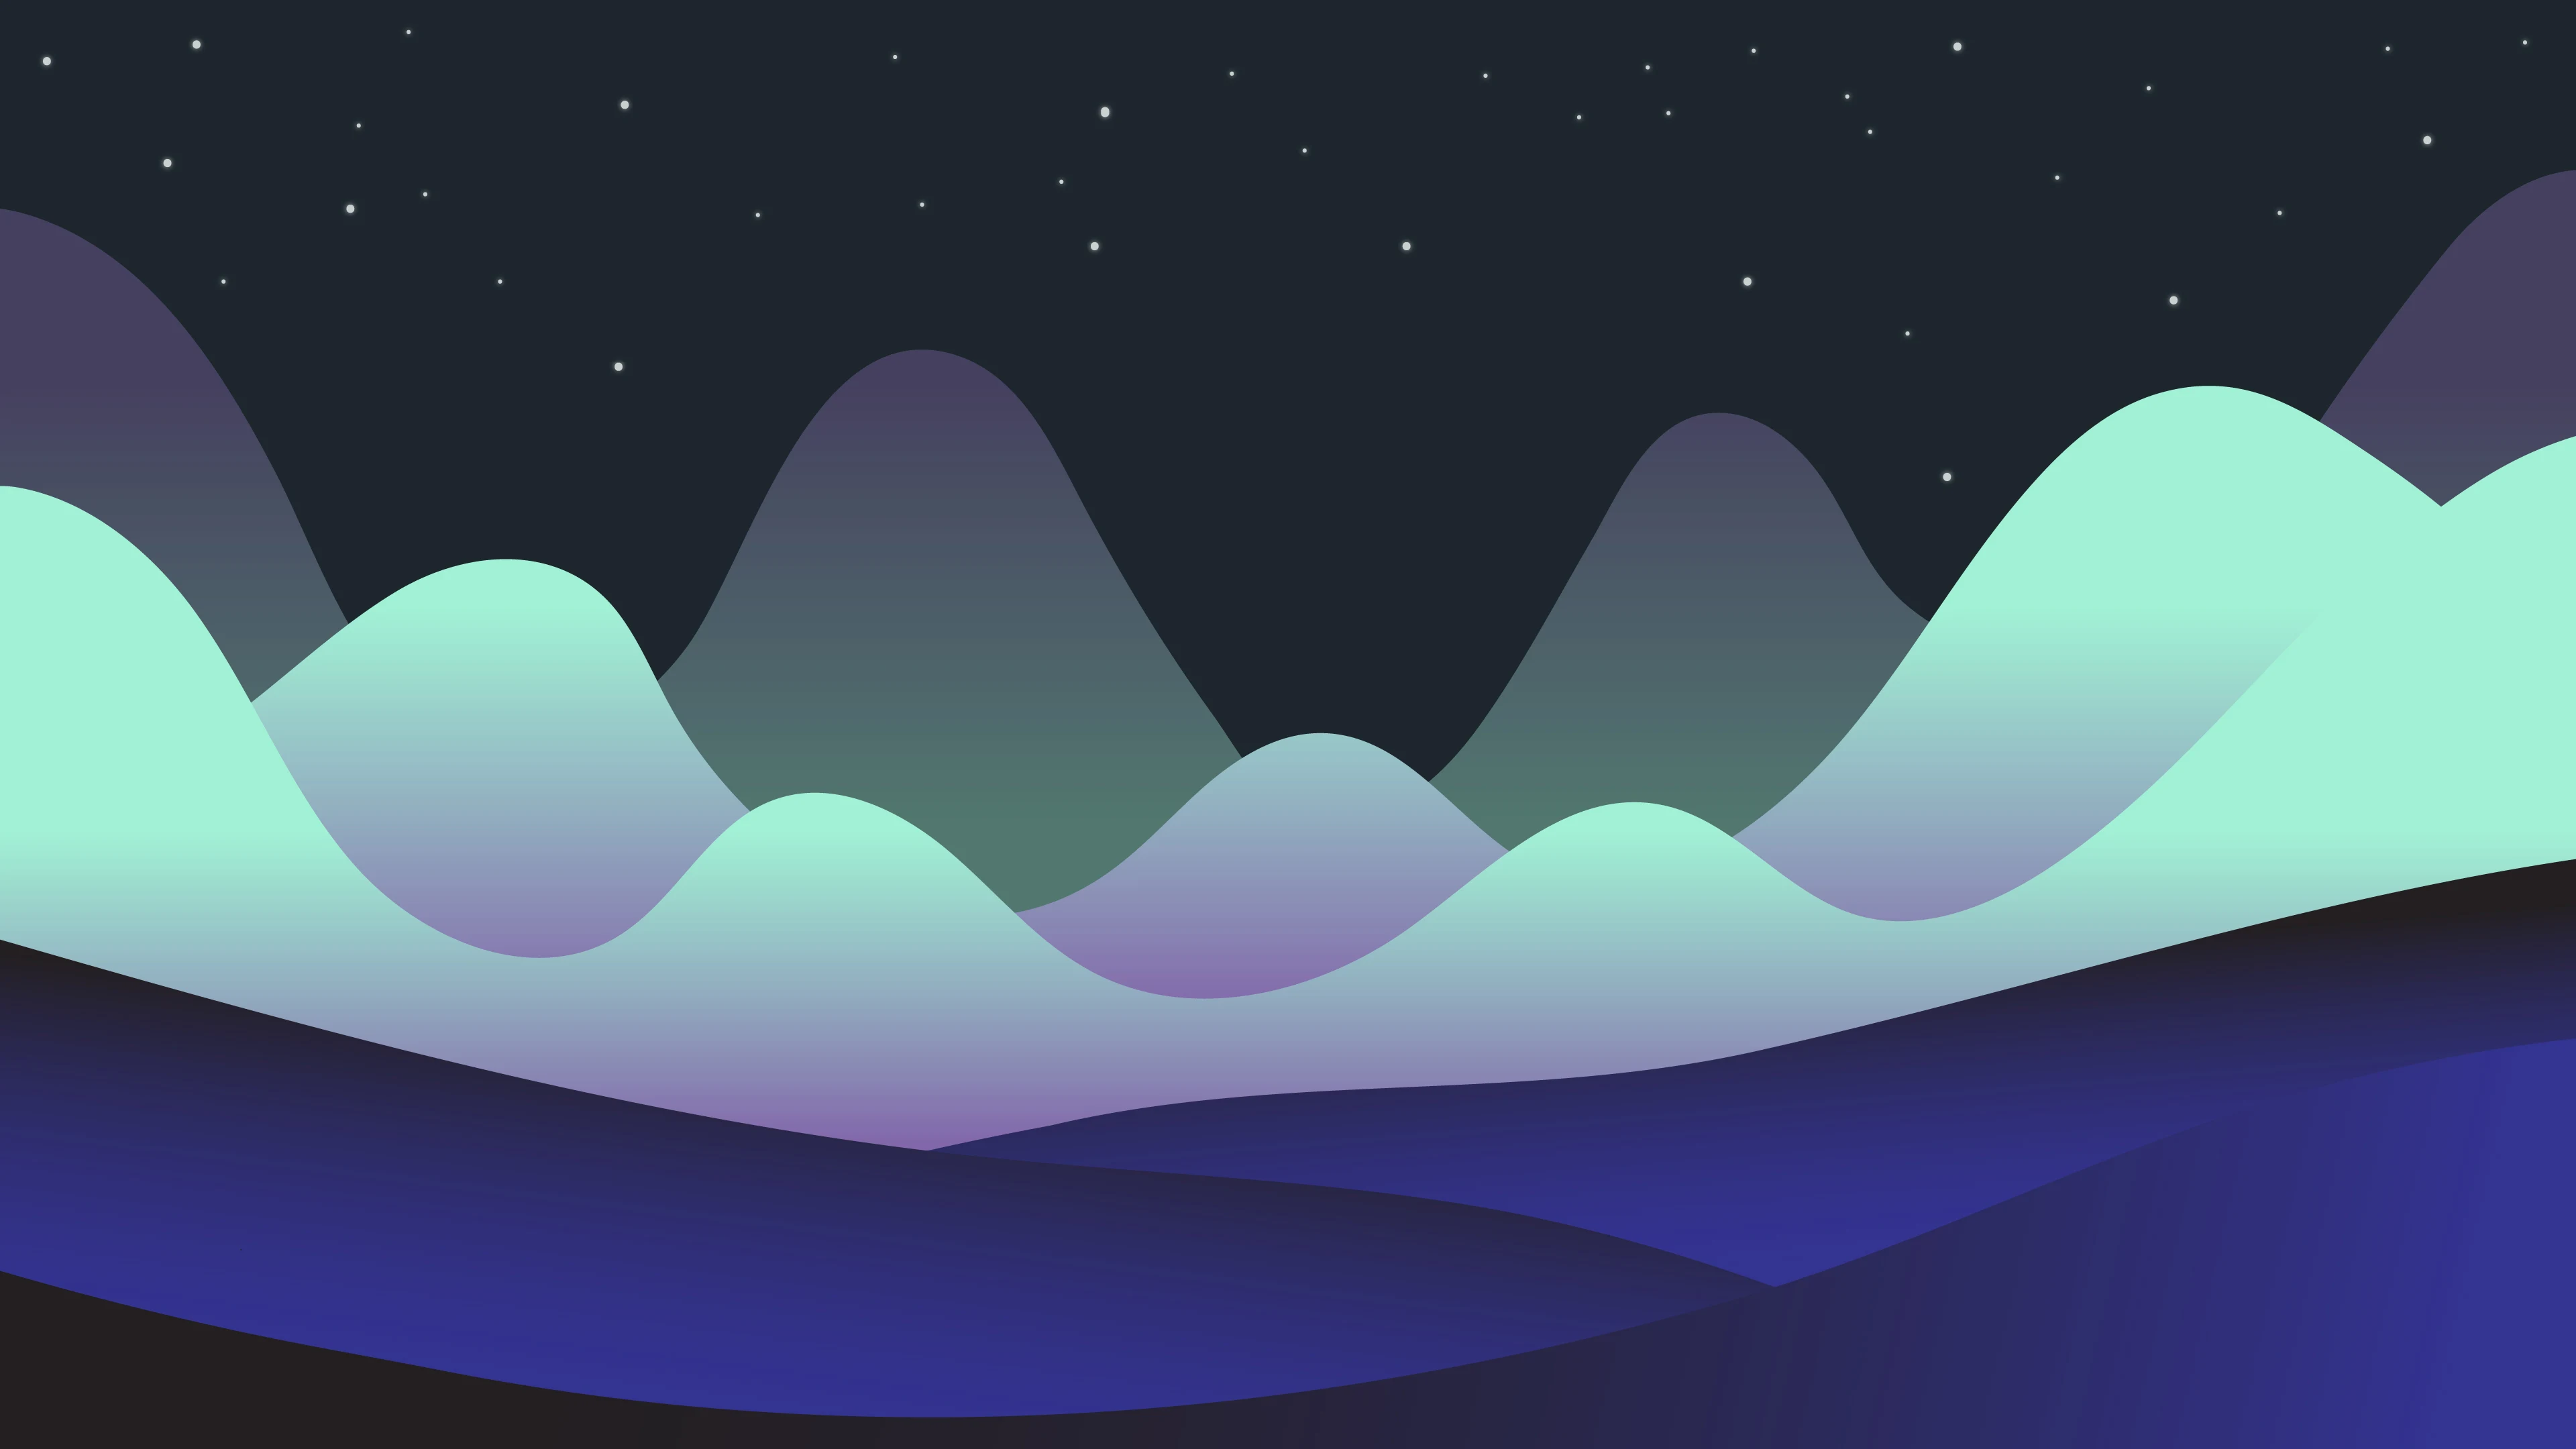 Abstract night landscape with wavy layers of hills in shades of blue and purple under a starry sky.